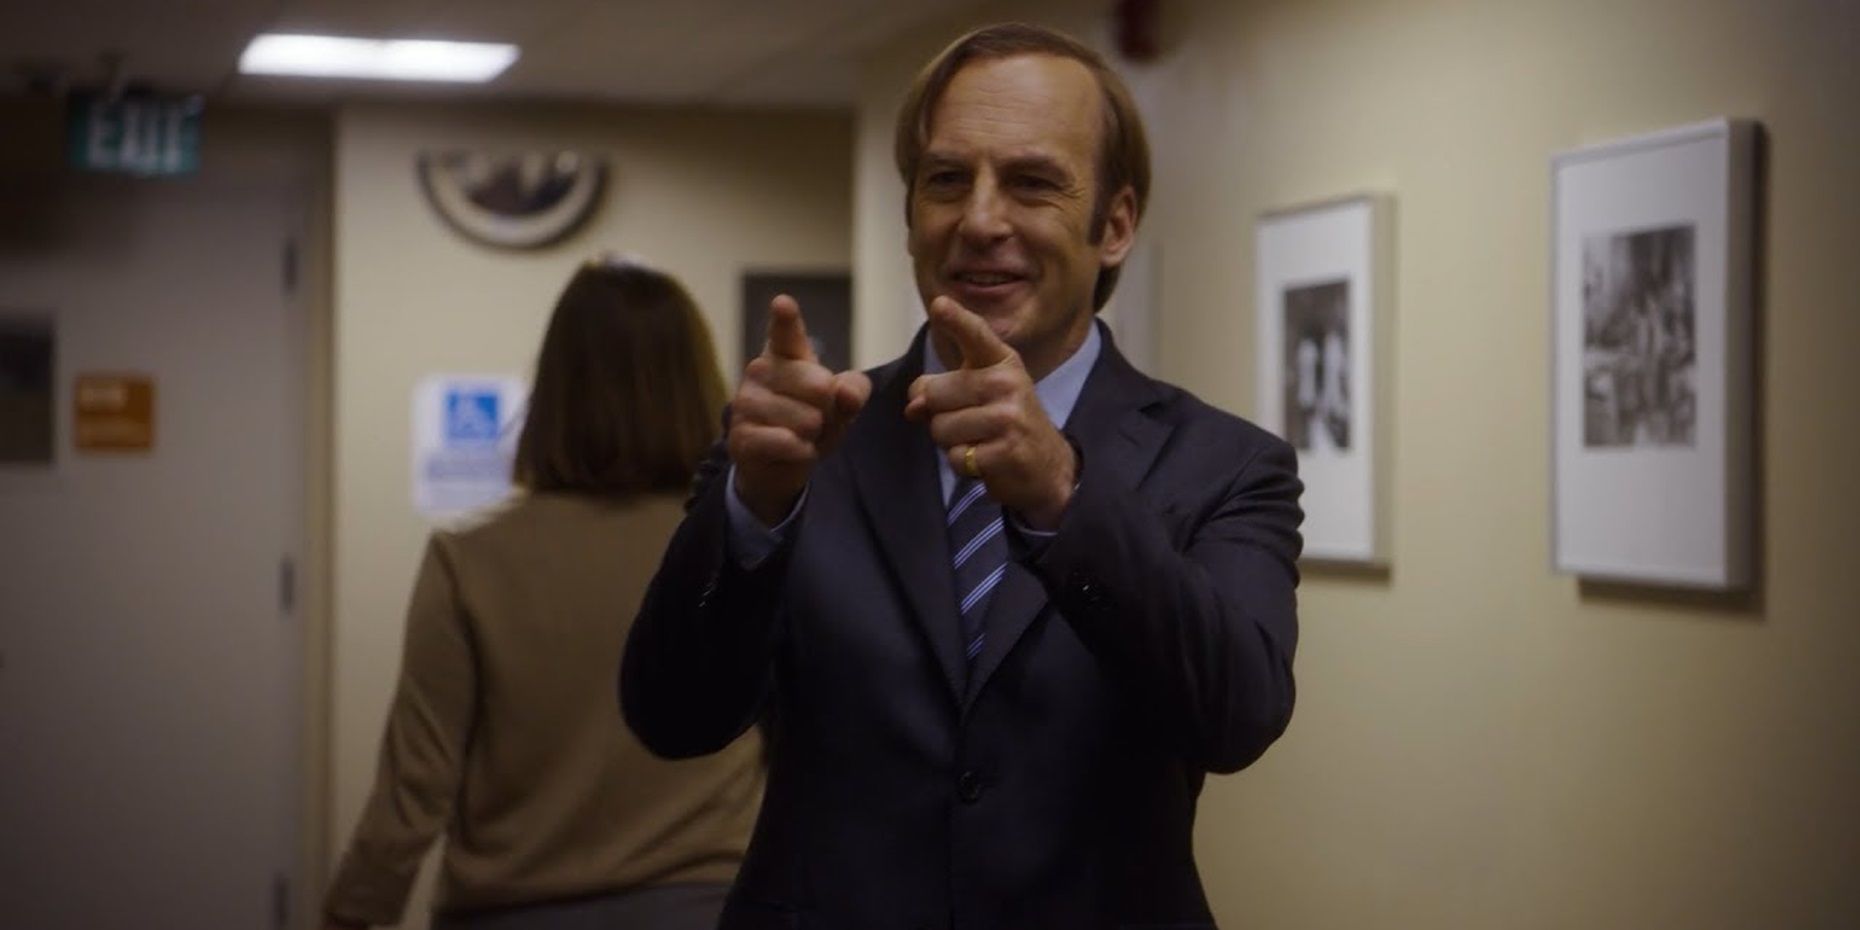 Jimmy says 'S'all good man' in Better Call Saul